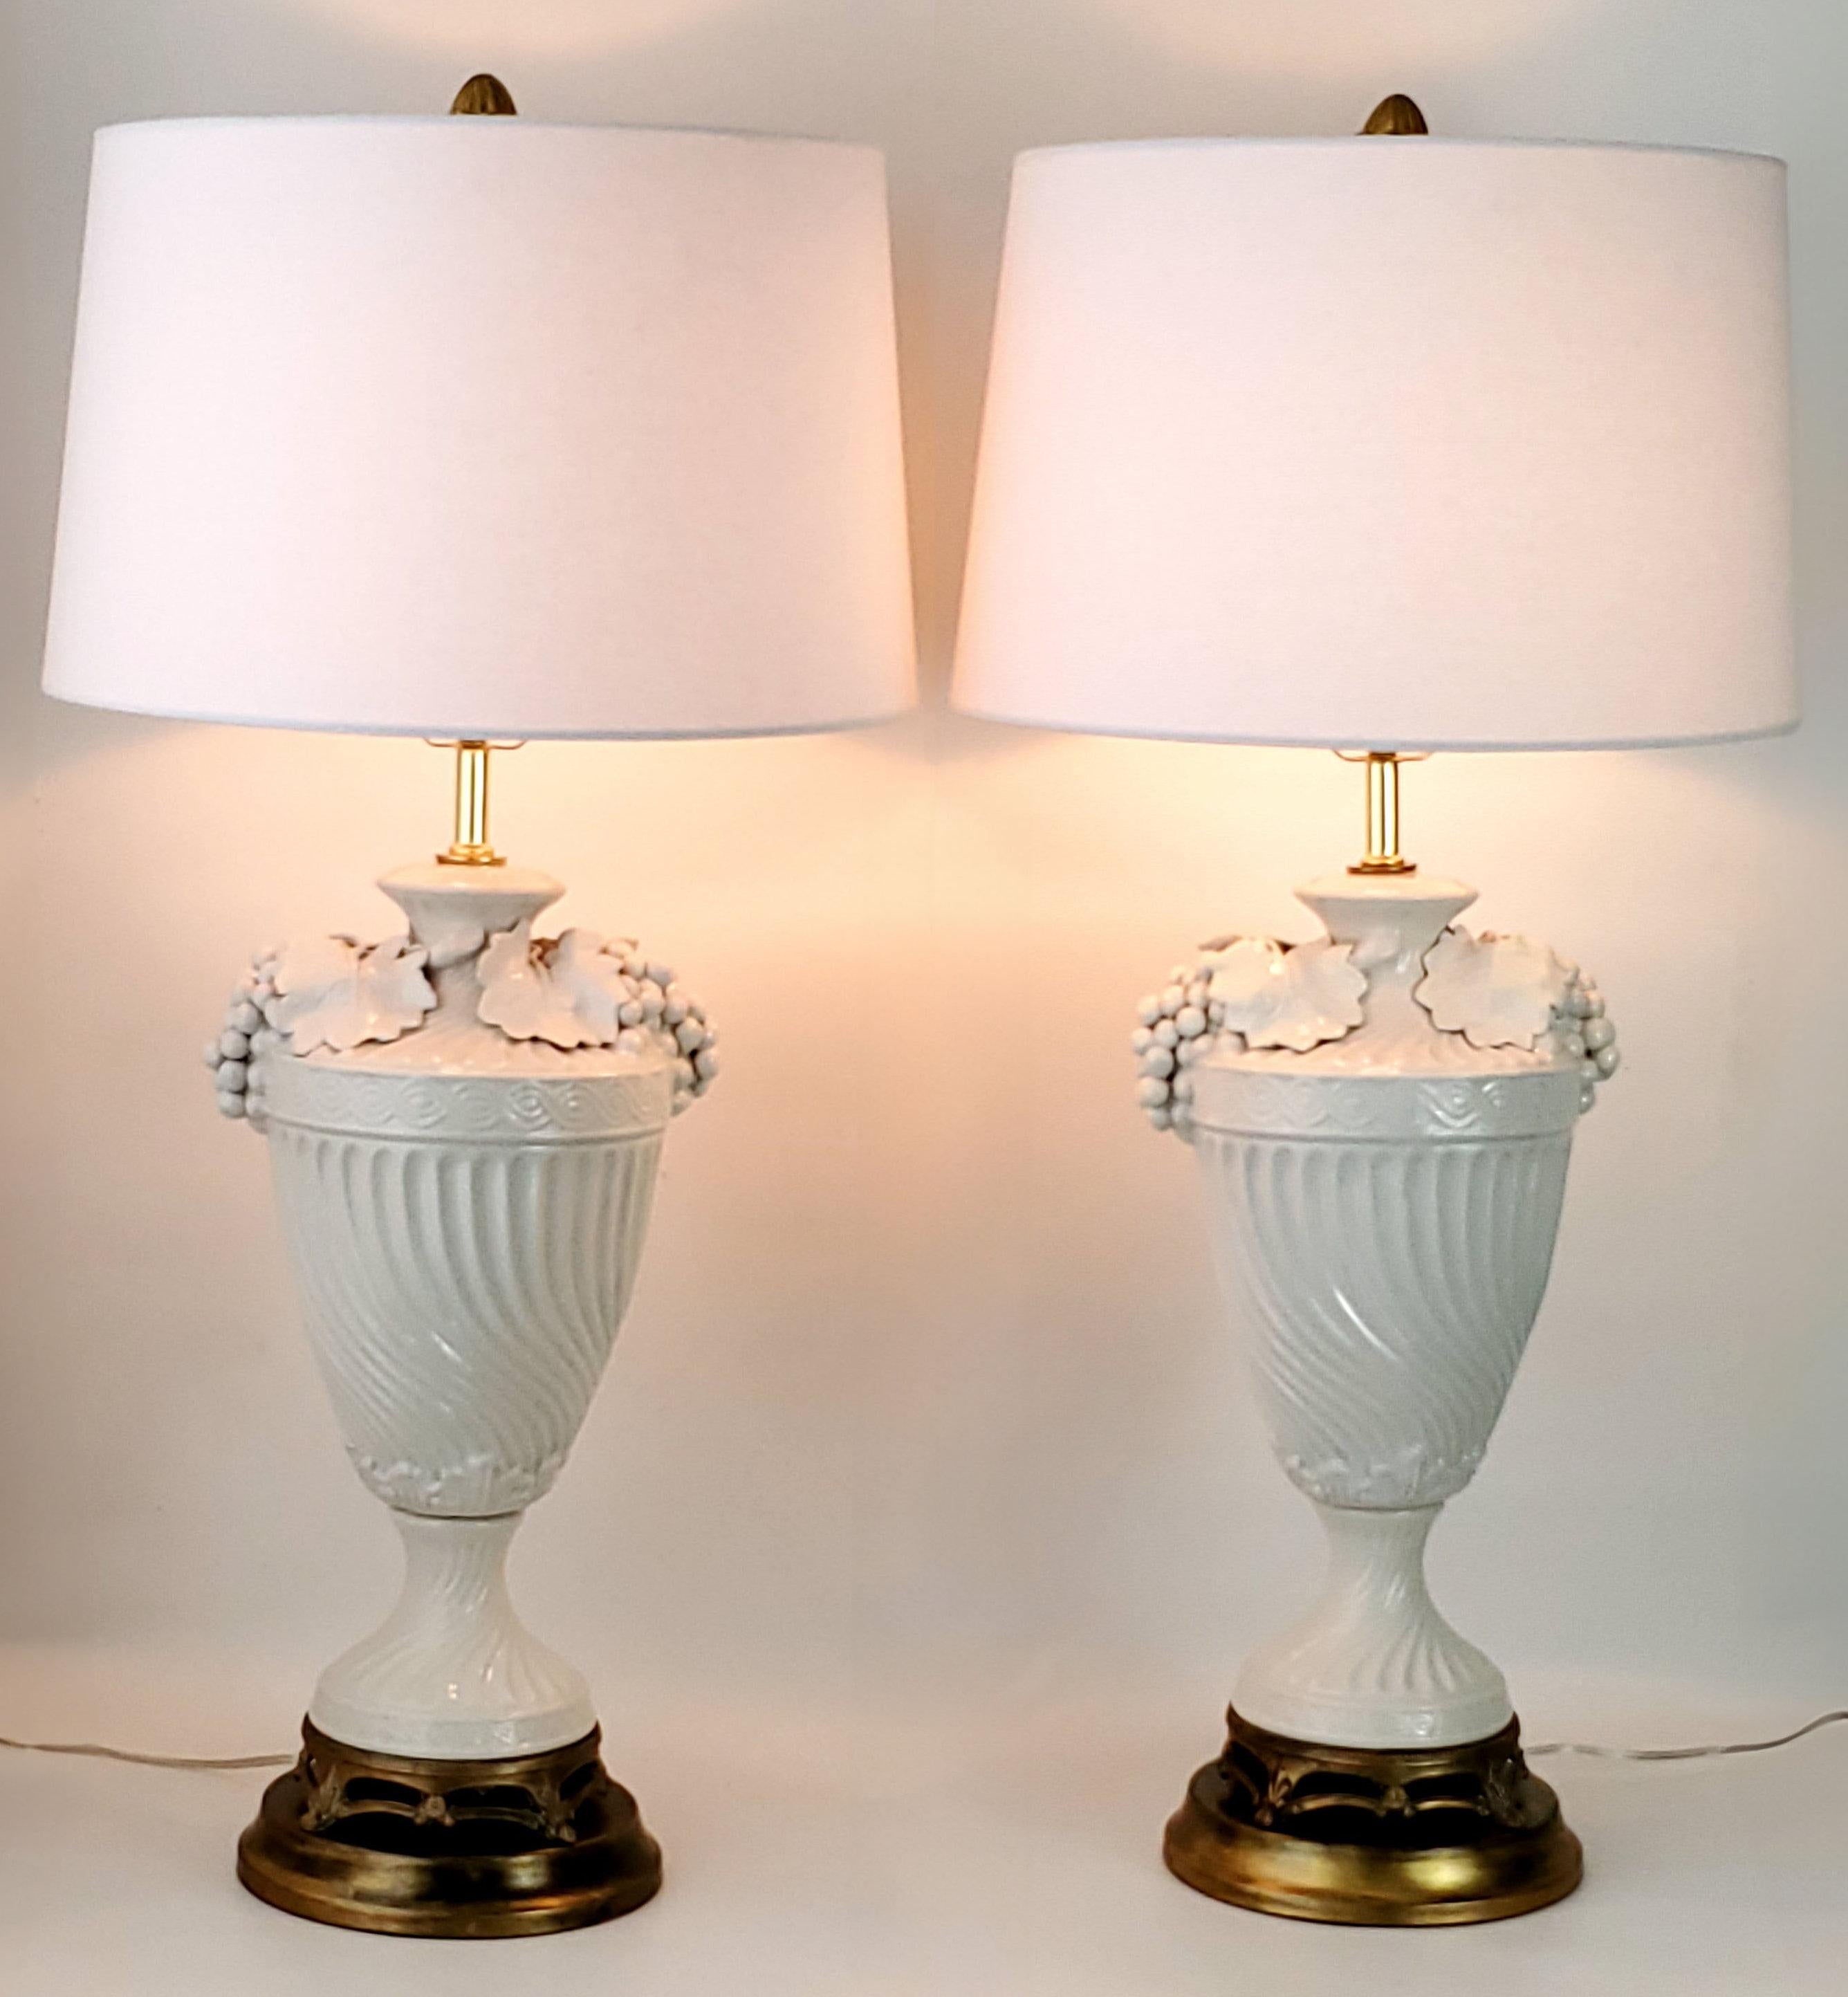 Pair Blanc De Chine Italian White Porcelain Urn Table Lamps with Grape Leaves For Sale 6